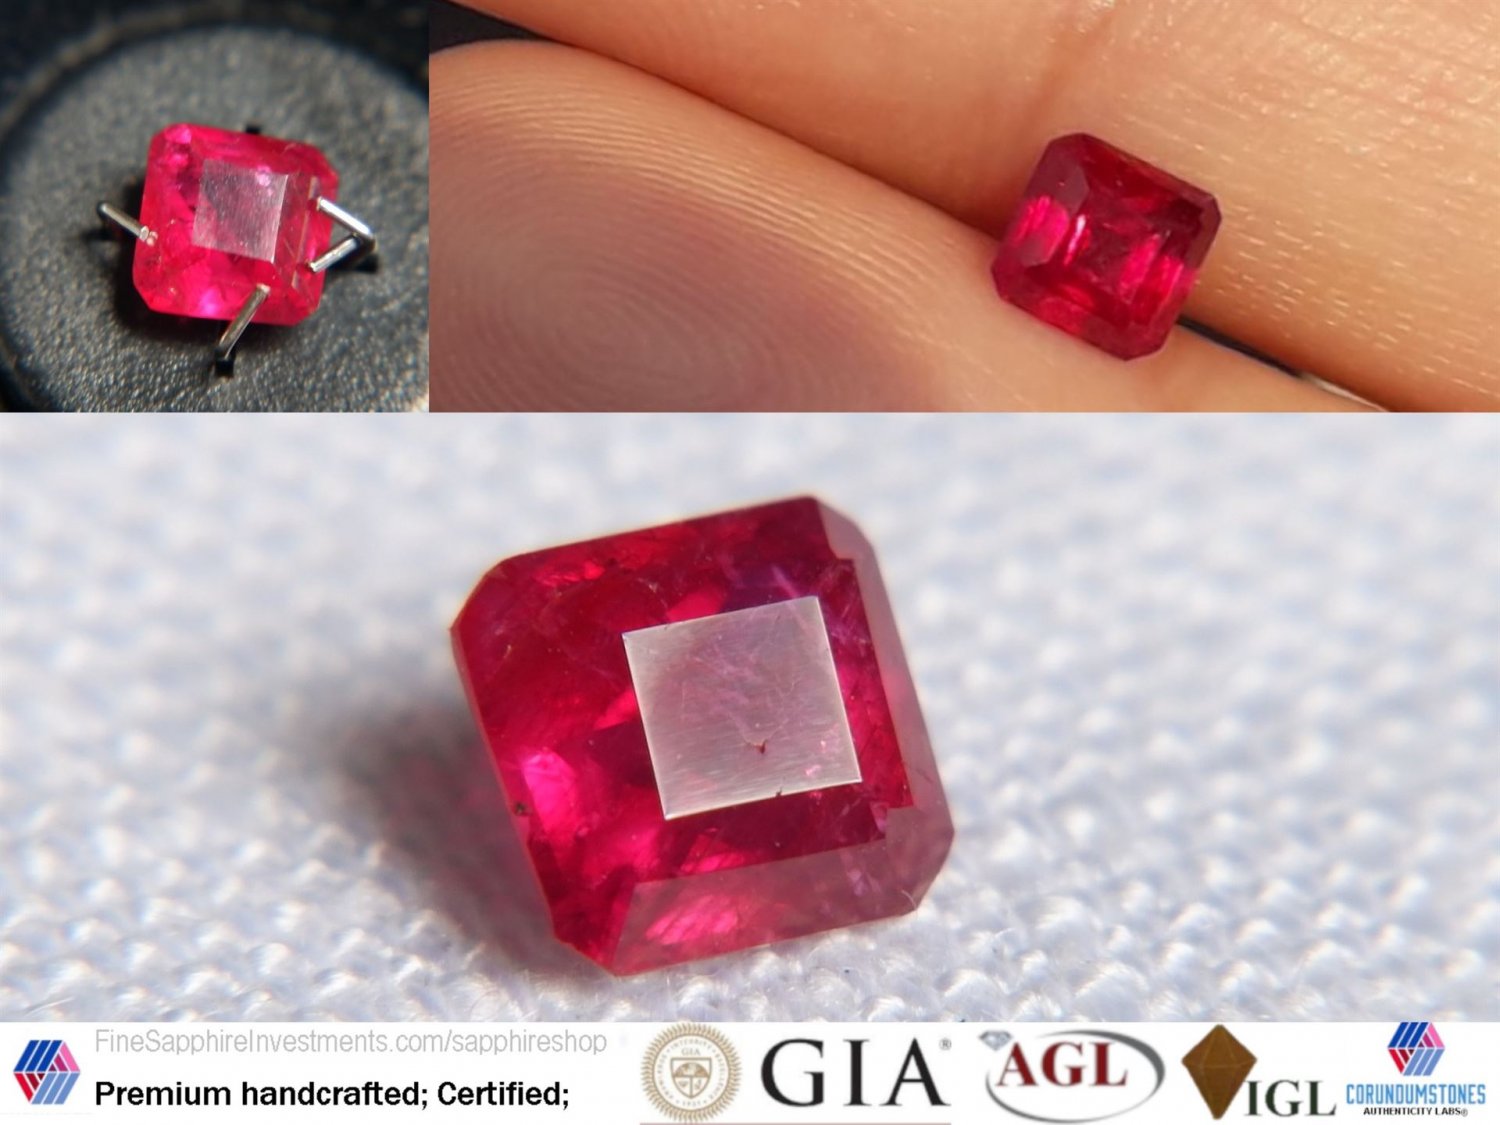 0.711 ct IGL Blood Red Ruby, untreated, loose, IGL premium handcrafted step cut with lustrous finish